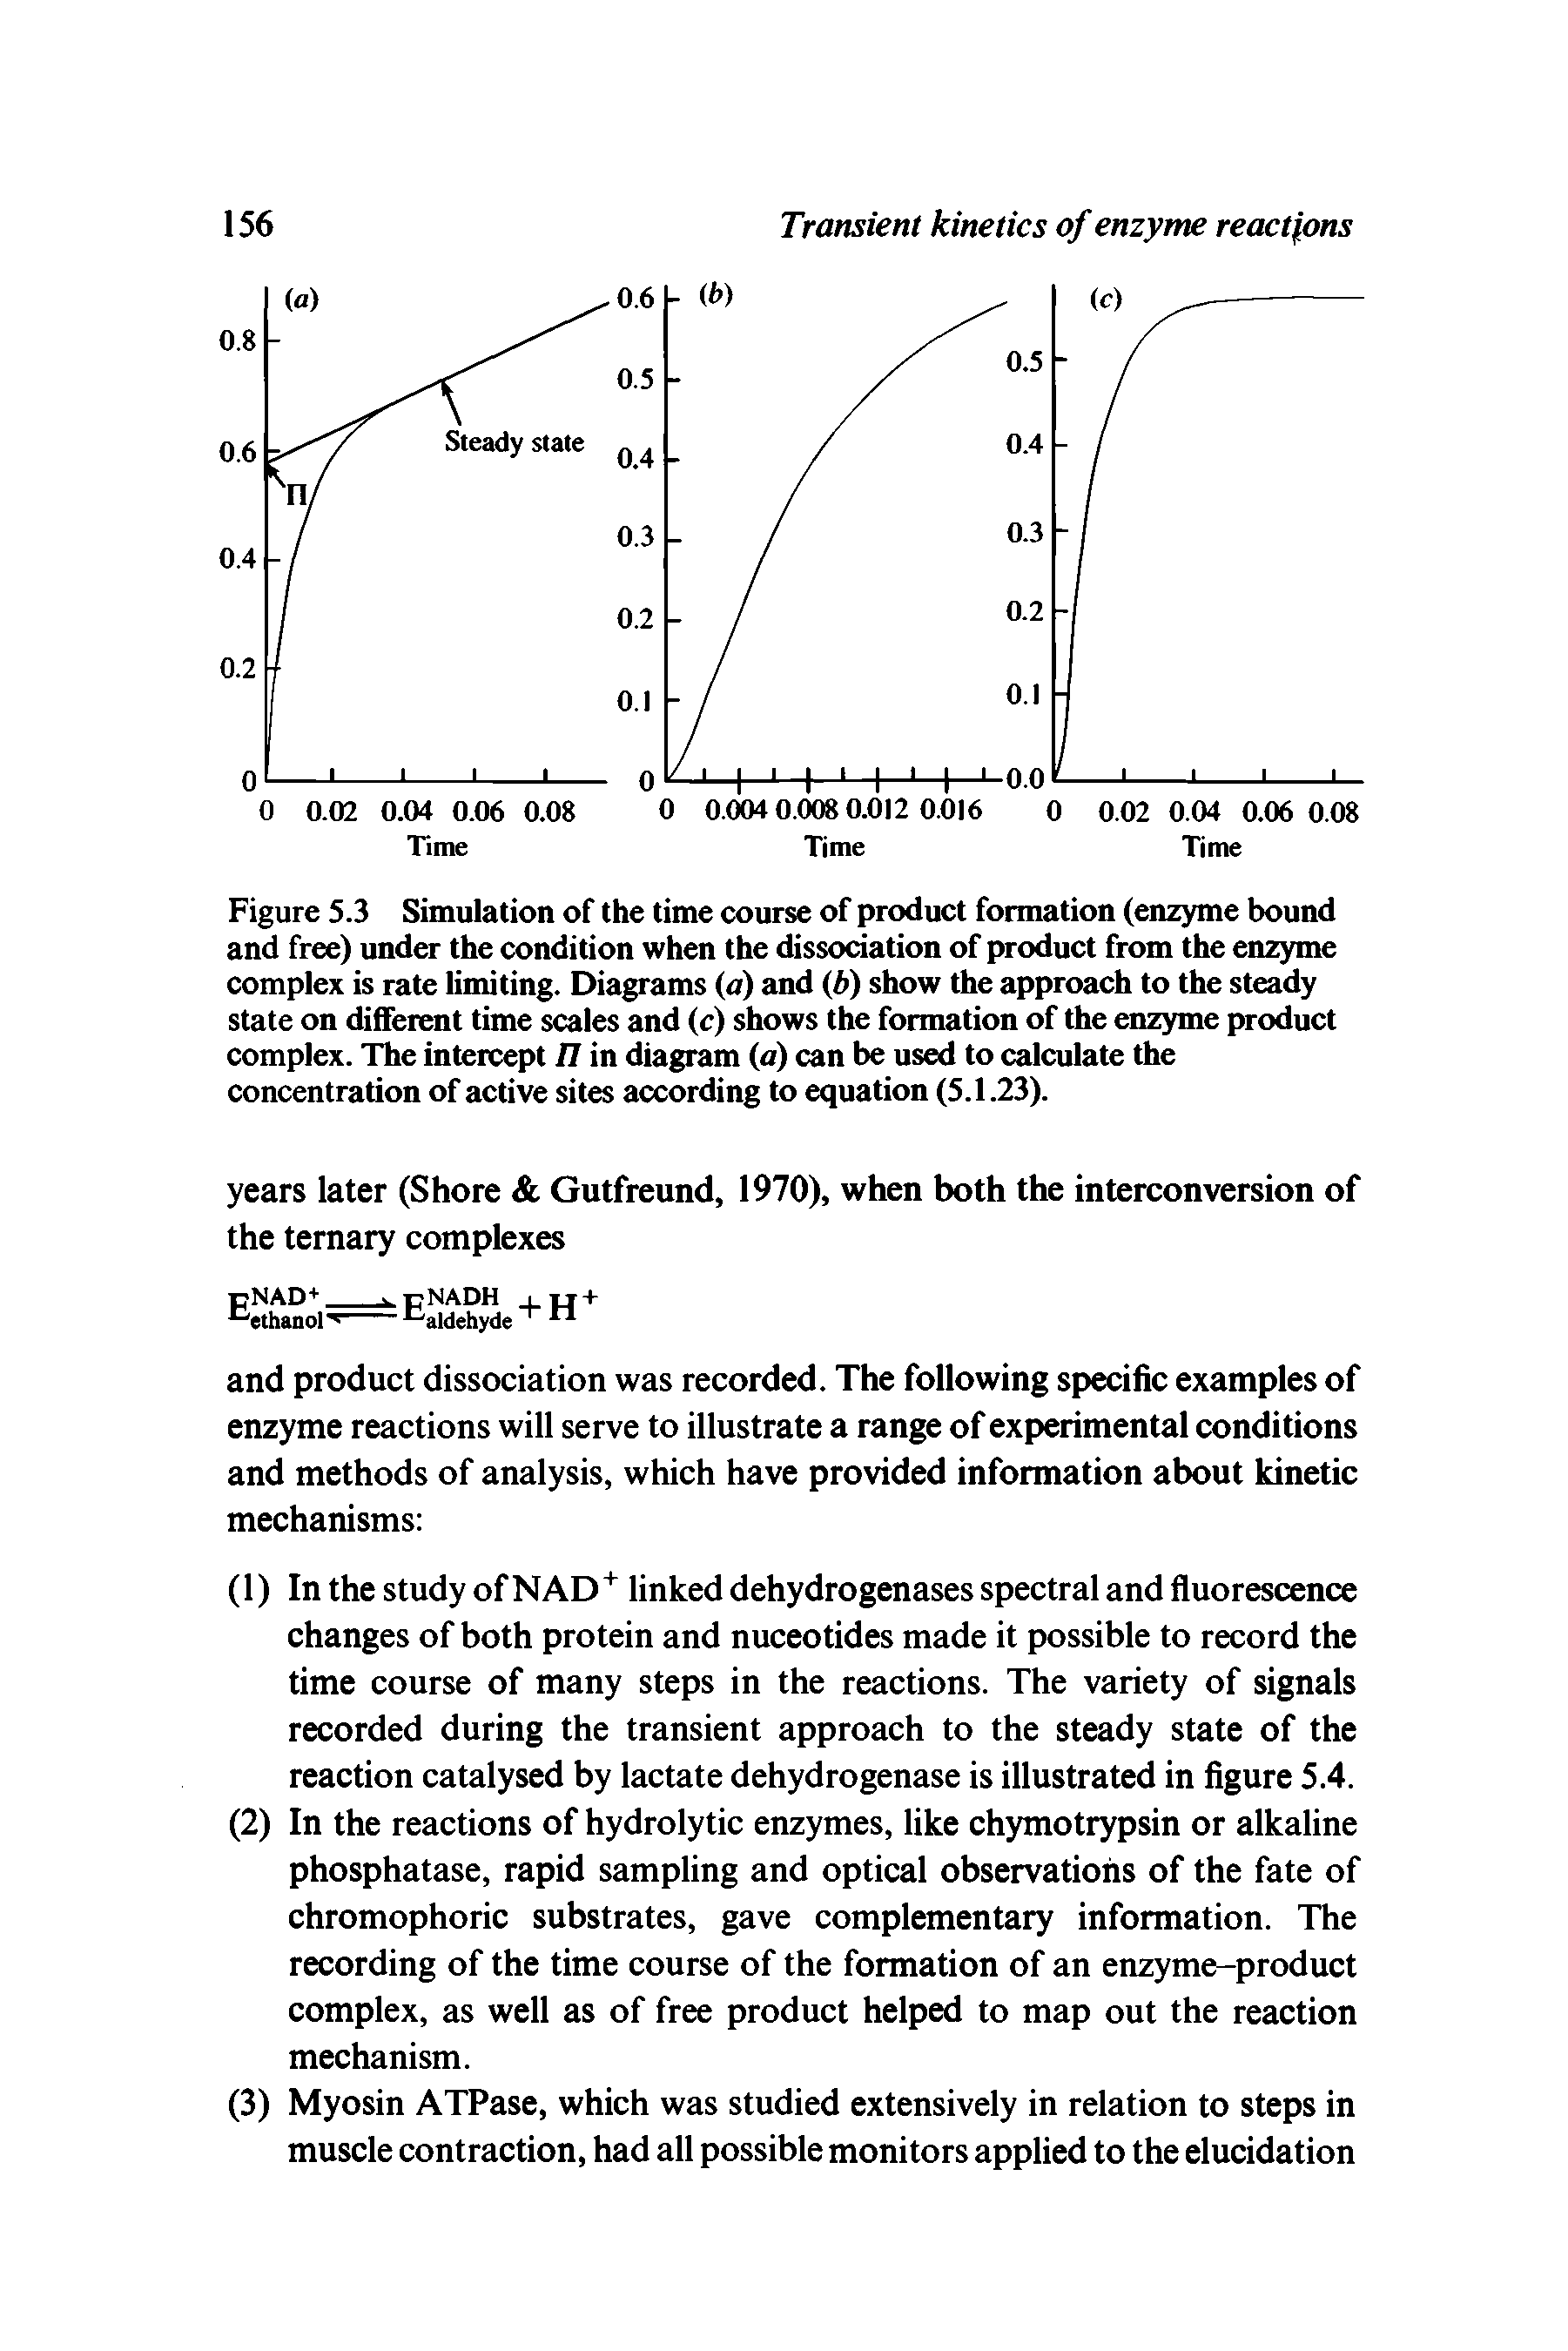 Figure 5.3 Simulation of the time course of product formation (enzyme bound and free) under the condition when the dissociation of product from the enzyme complex is rate limiting. Diagrams (a) and (b) show the approach to the steady state on different time scales and (c) shows the formation of the enzyme product complex. The intercept 77 in diagram (a) can be used to calculate the concentration of active sites according to equation (5.1.23).